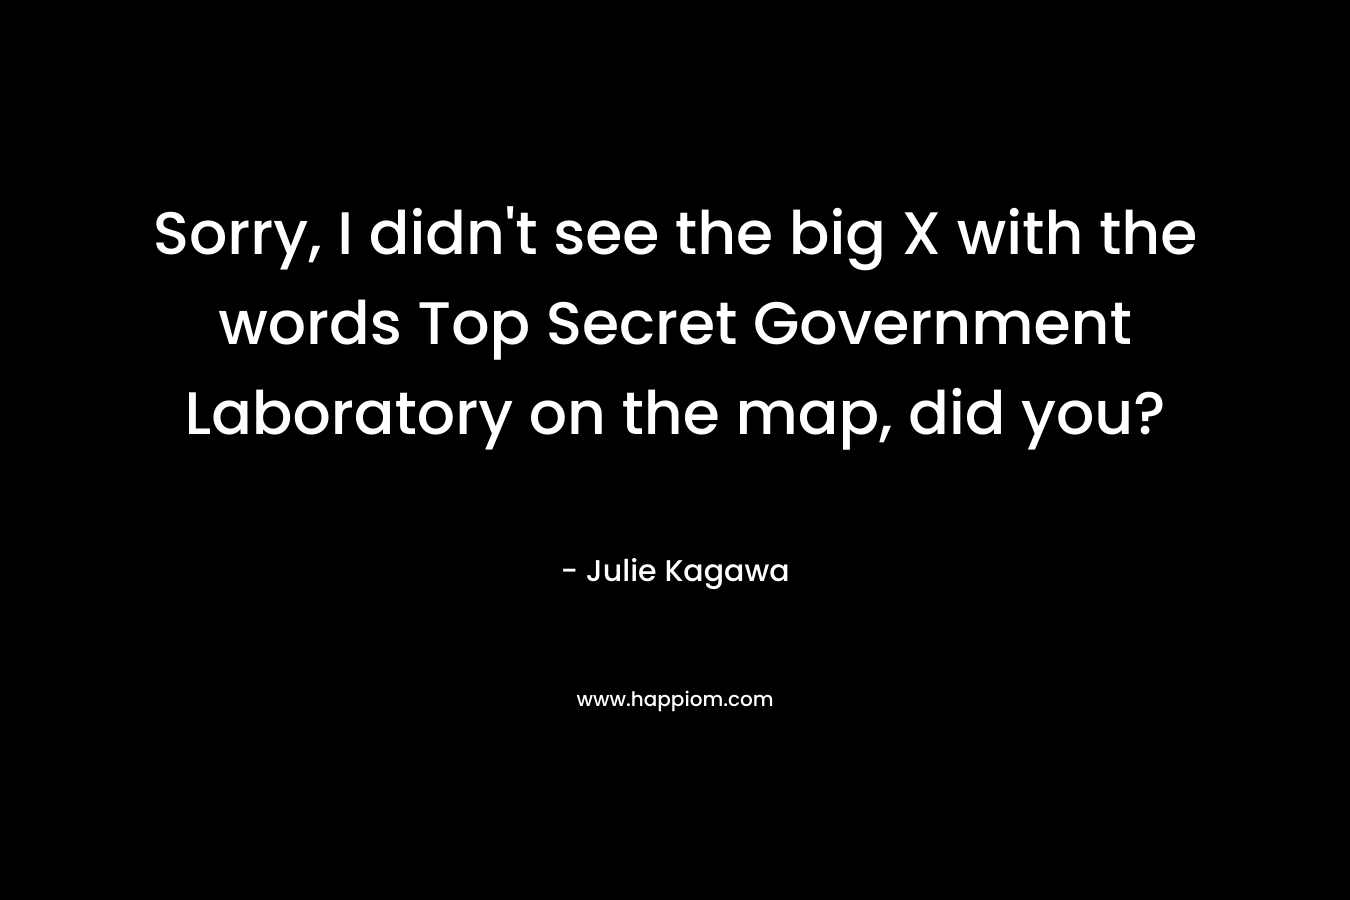 Sorry, I didn't see the big X with the words Top Secret Government Laboratory on the map, did you?